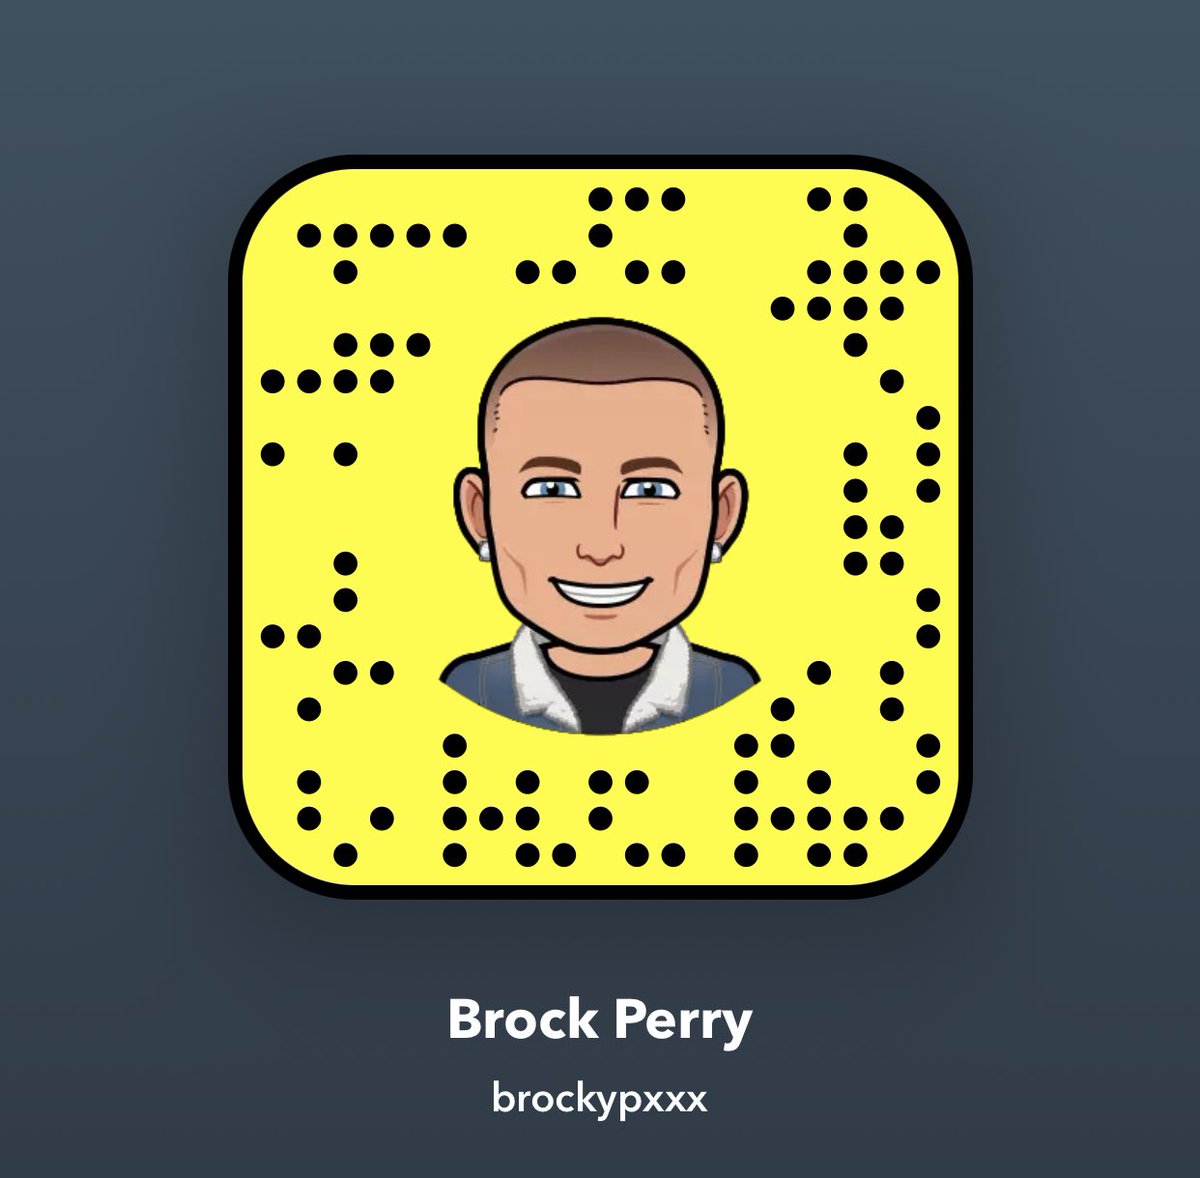 Be sure to add my new snap! Username is brockypxxx